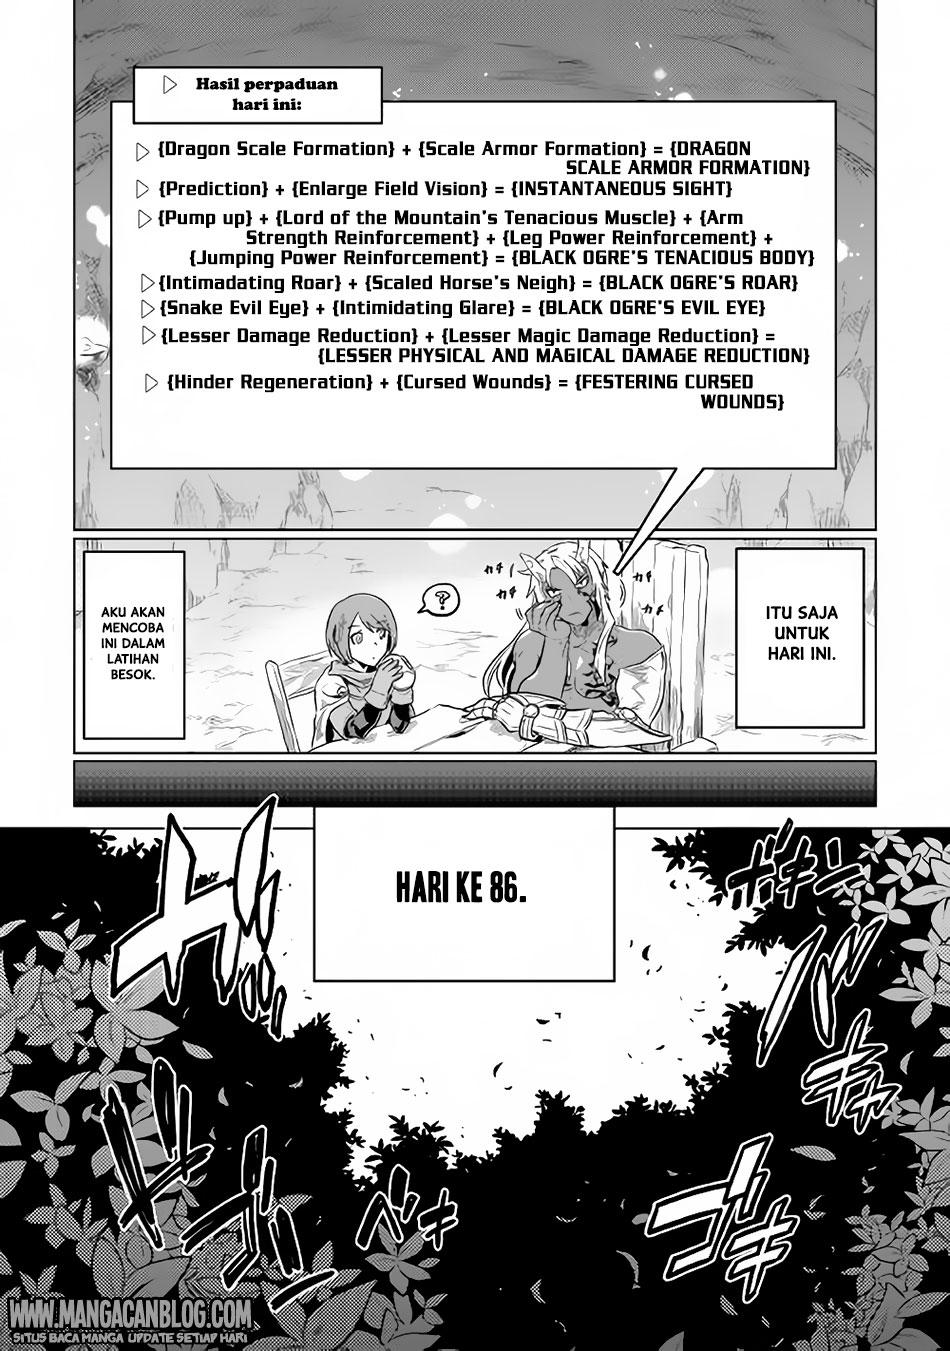 Re:Monster Chapter 36